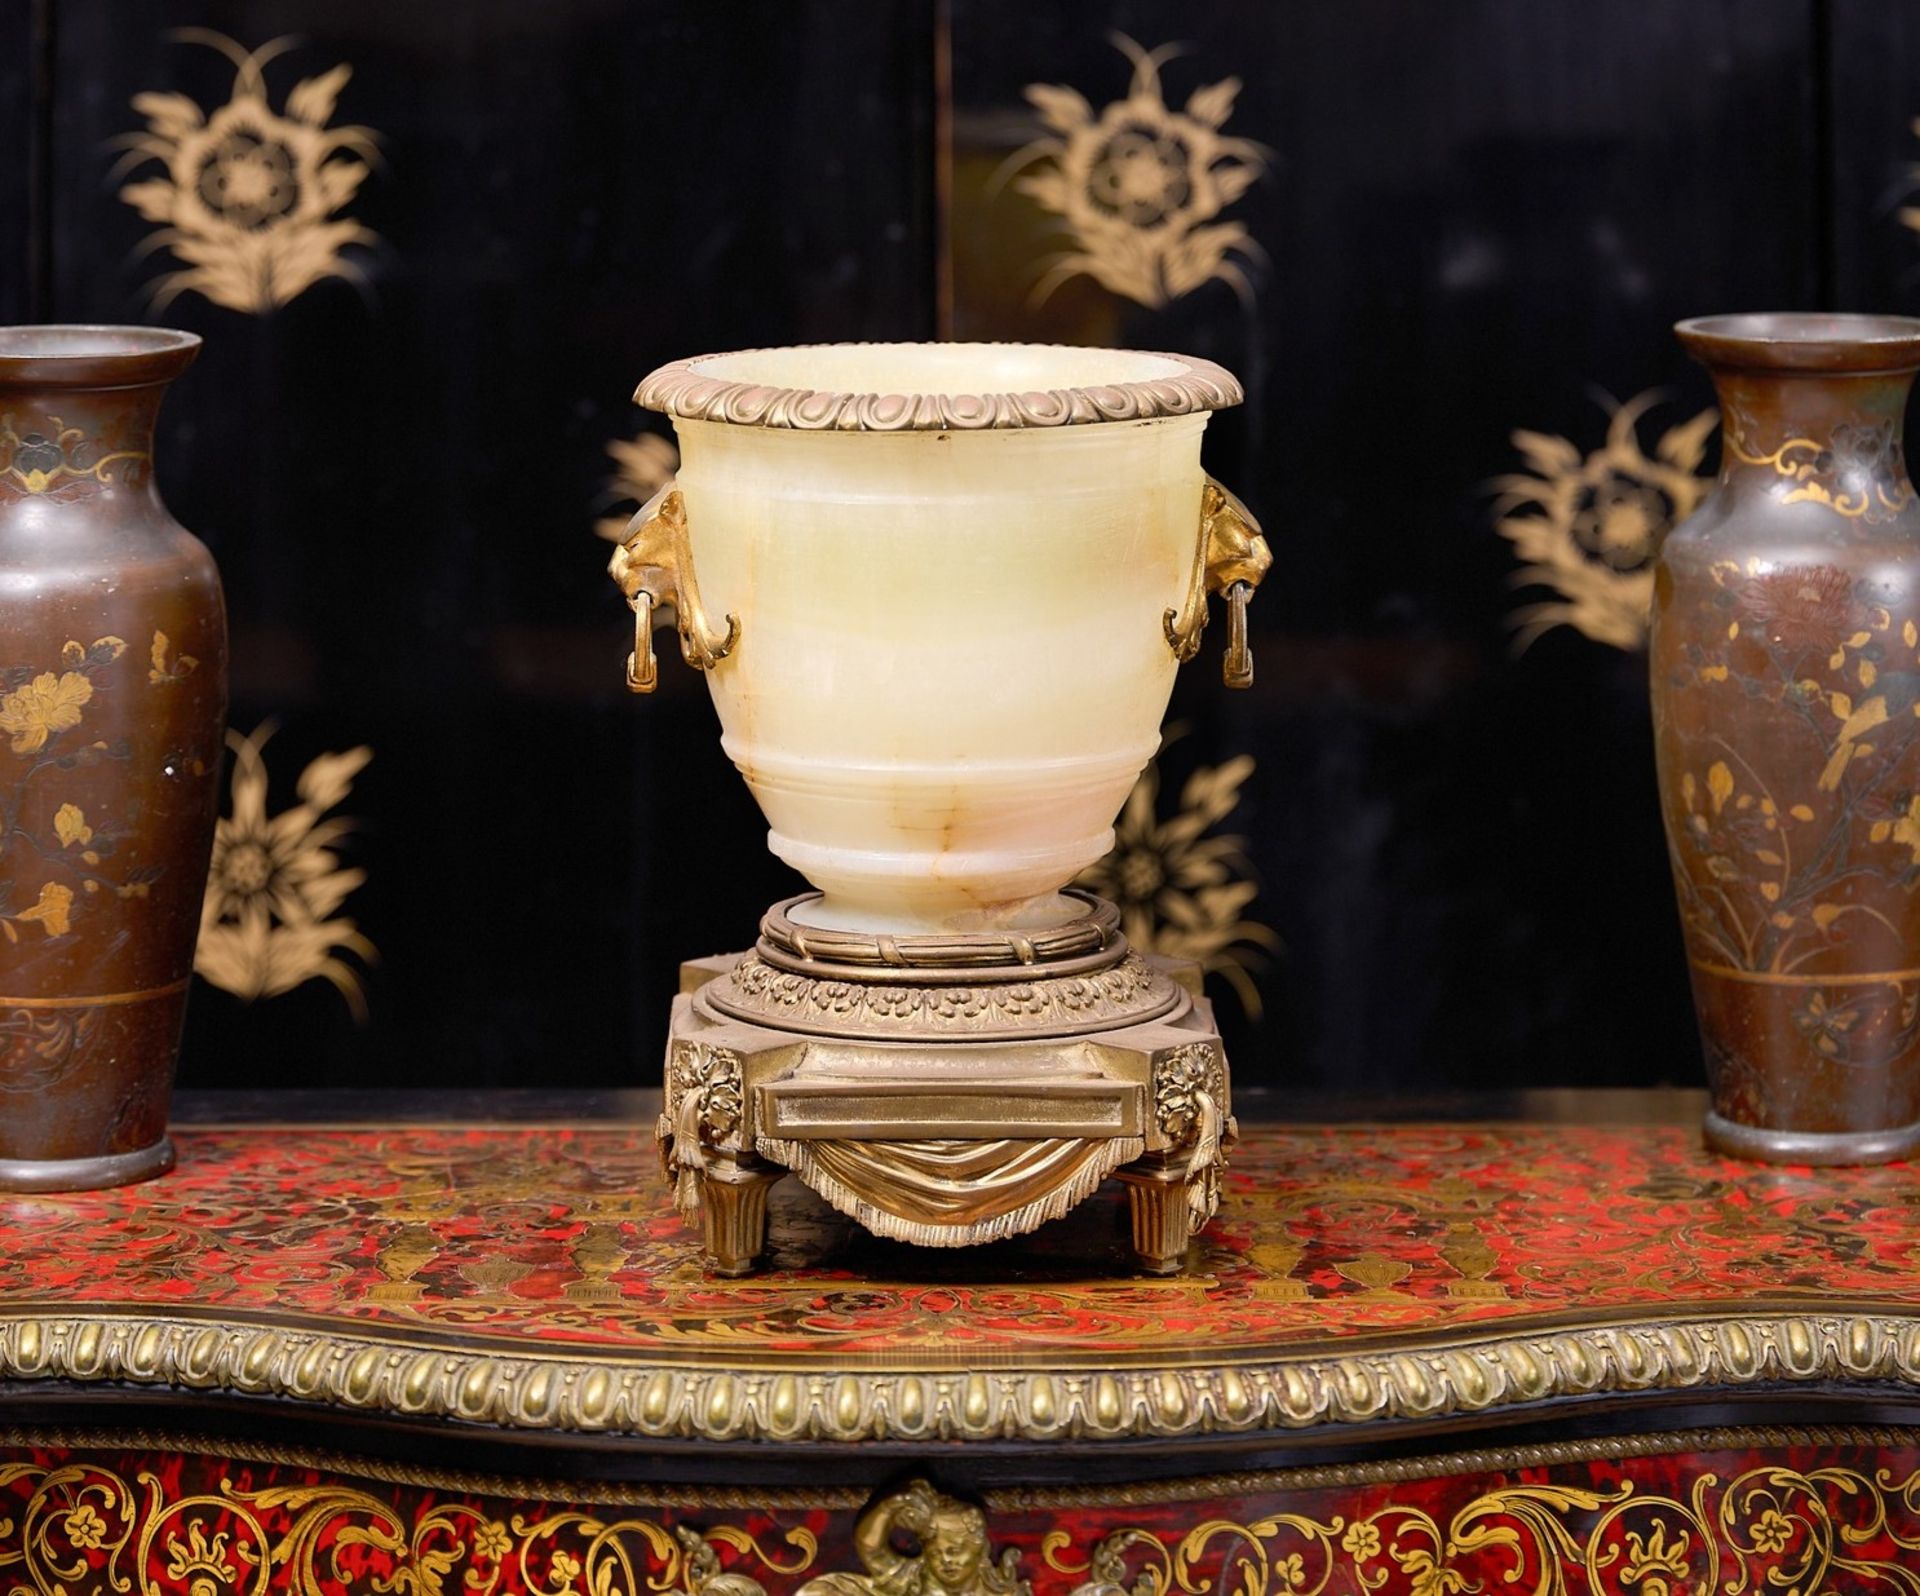 A LATE 19TH CENTURY FRENCH ONYX AND GILT BRONZE MOUNTED CHAMPAGNE BUCKET - Image 2 of 2